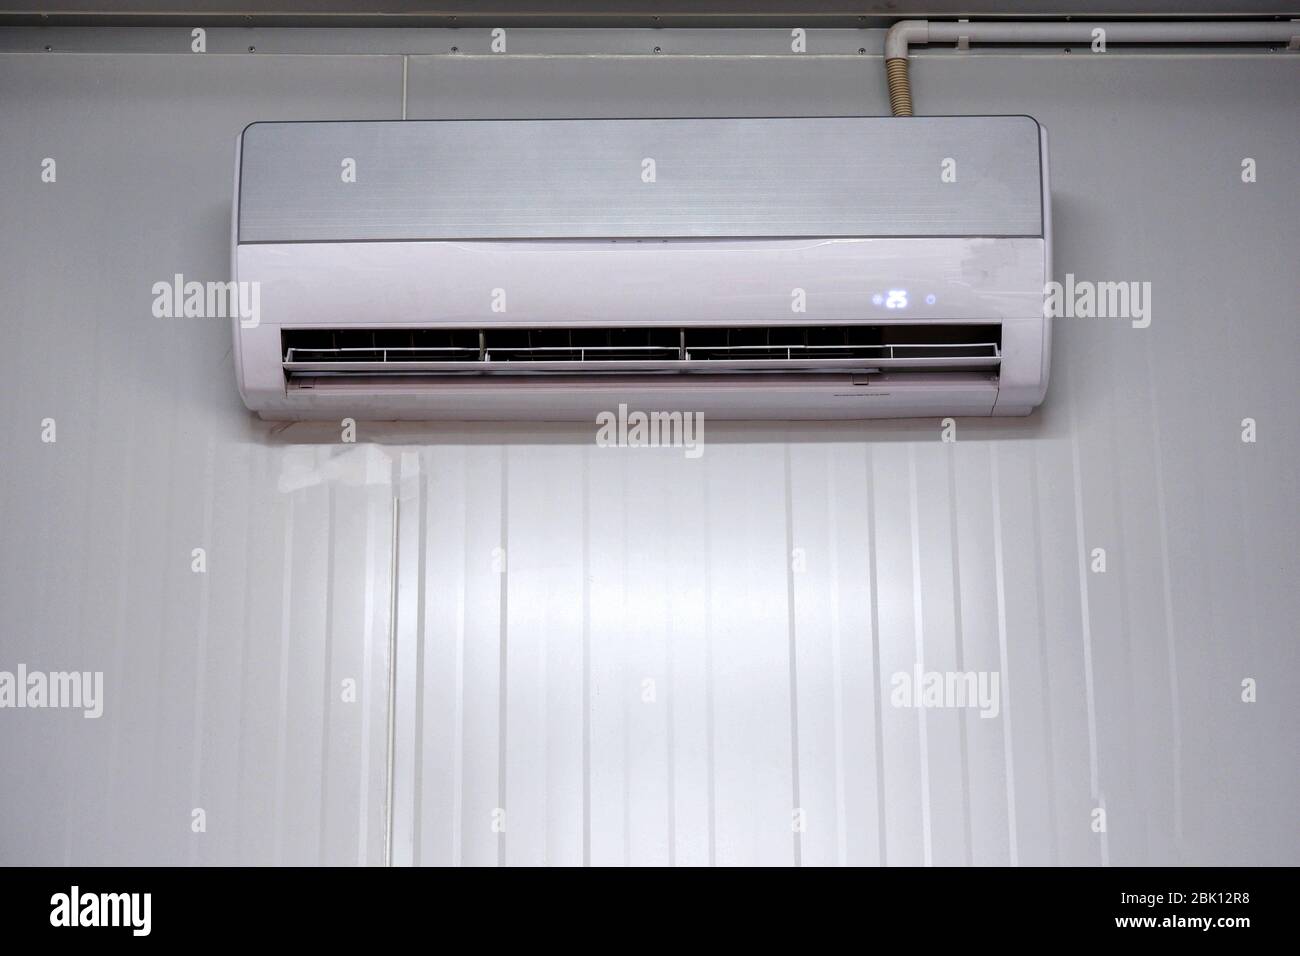 White wall mounted air conditioner Stock Photo